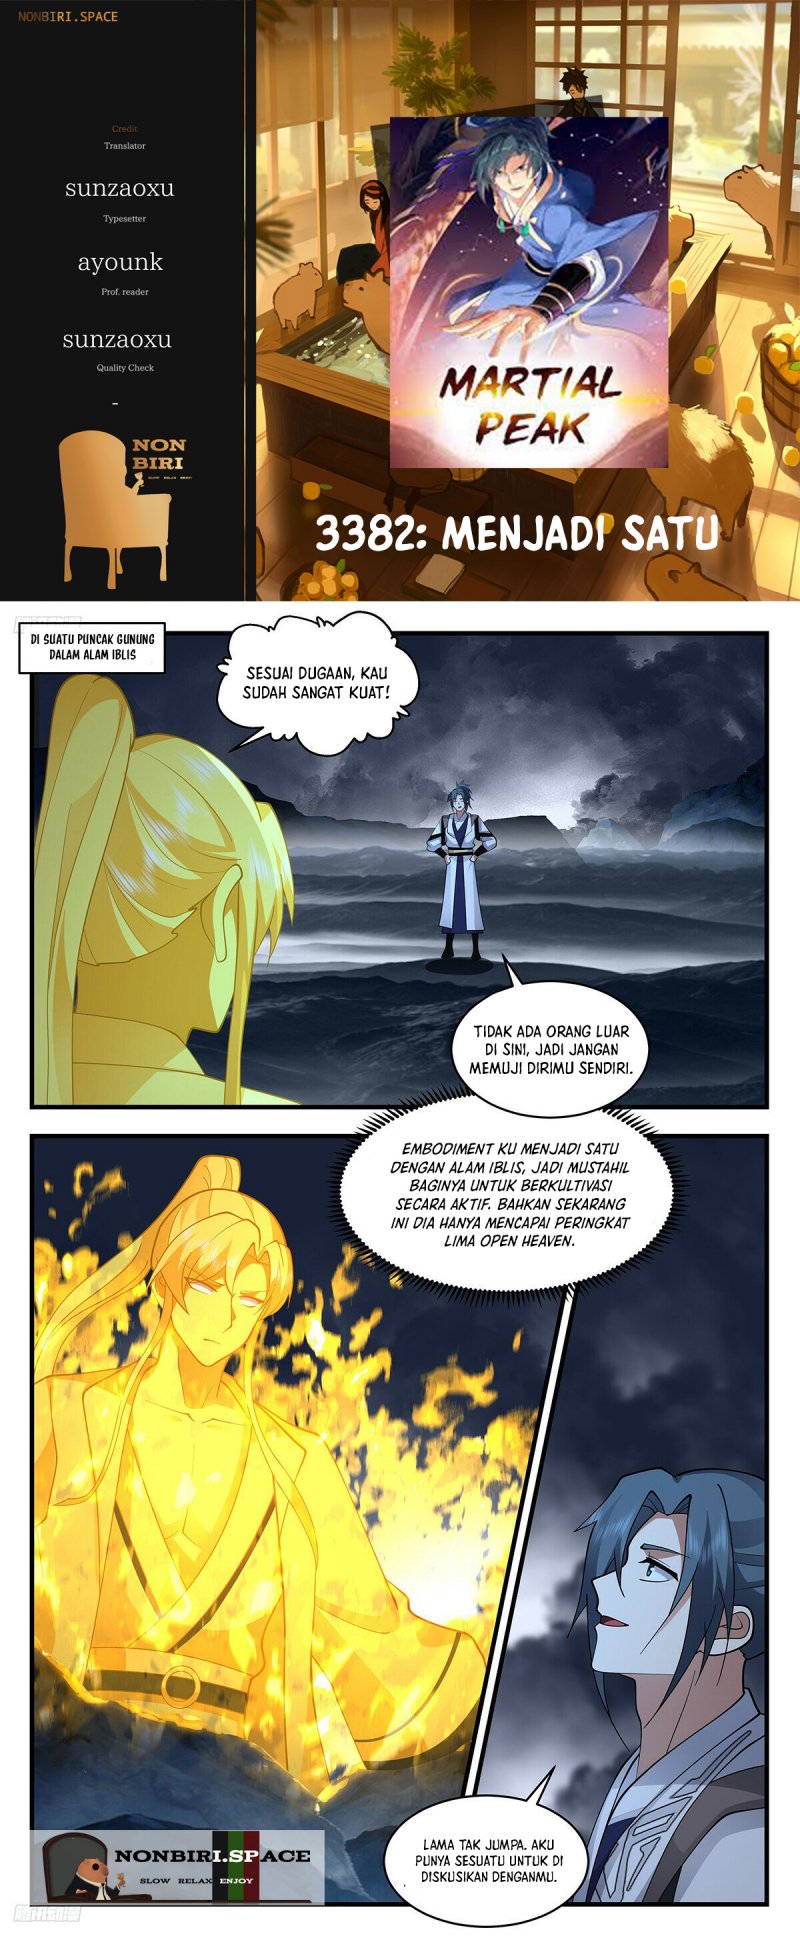 Martial Peak: Chapter 3382 - Page 1